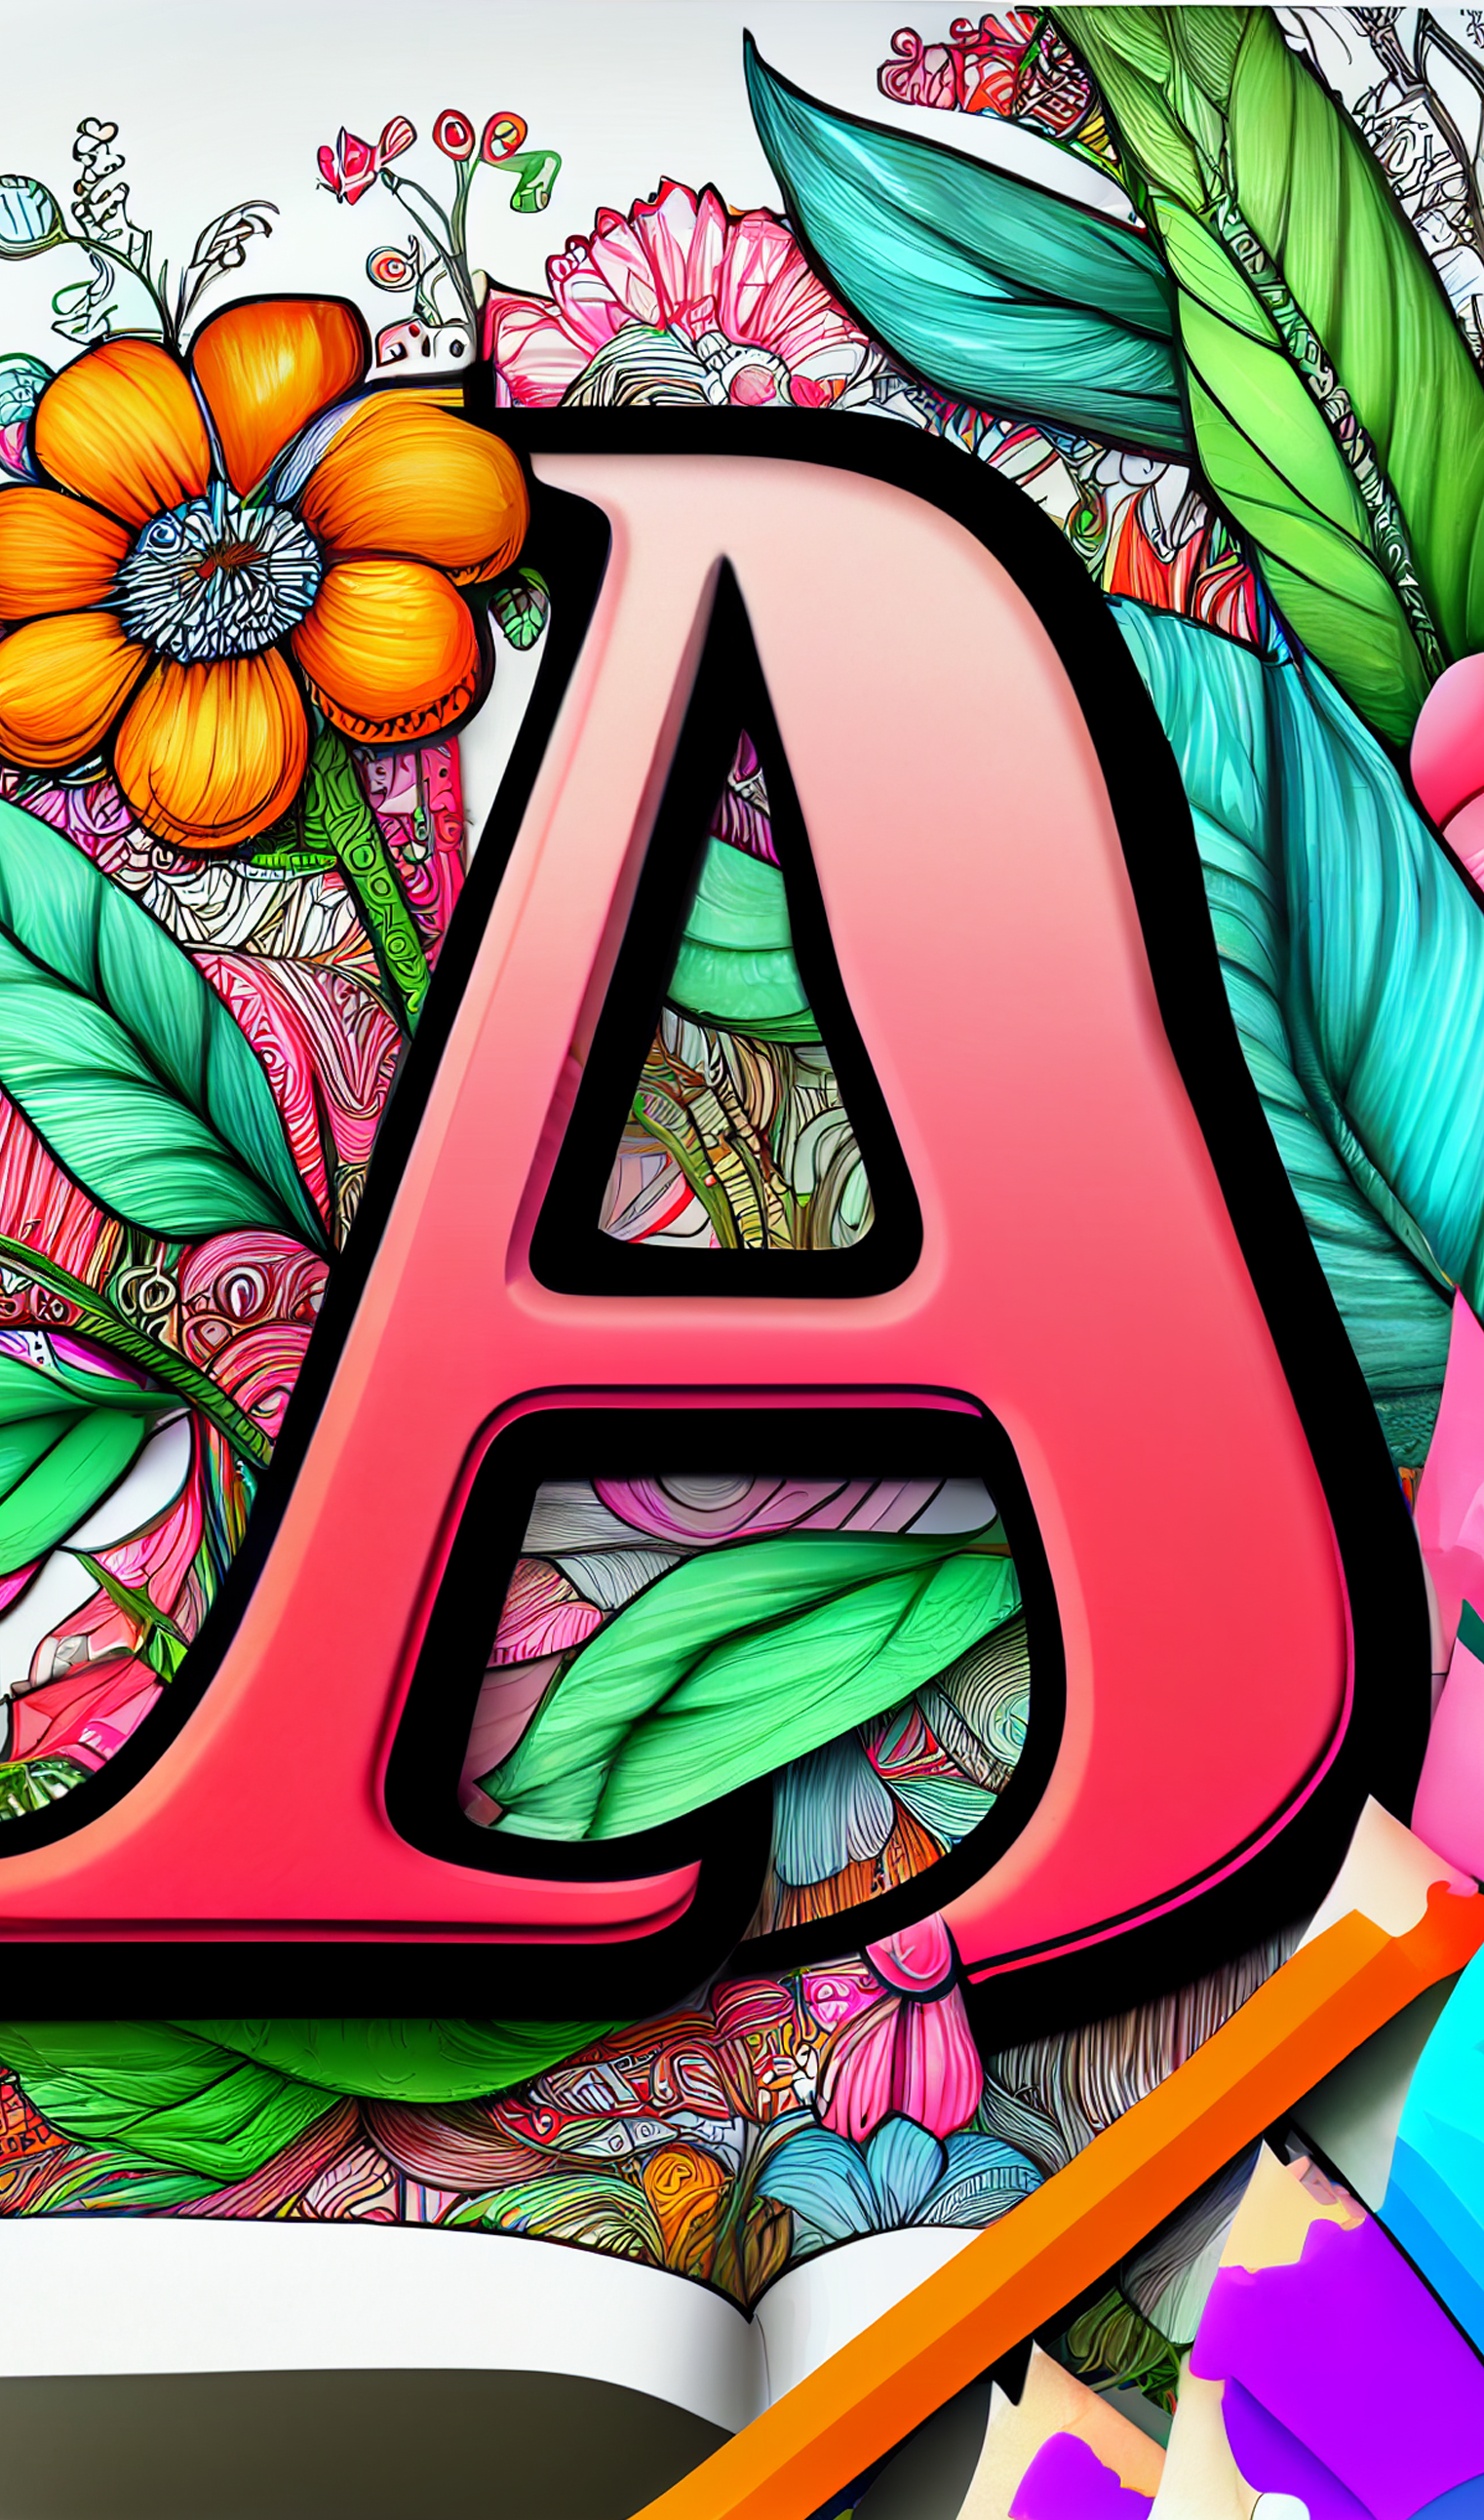 Alphabet Lore Coloring Pages android iOS-TapTap